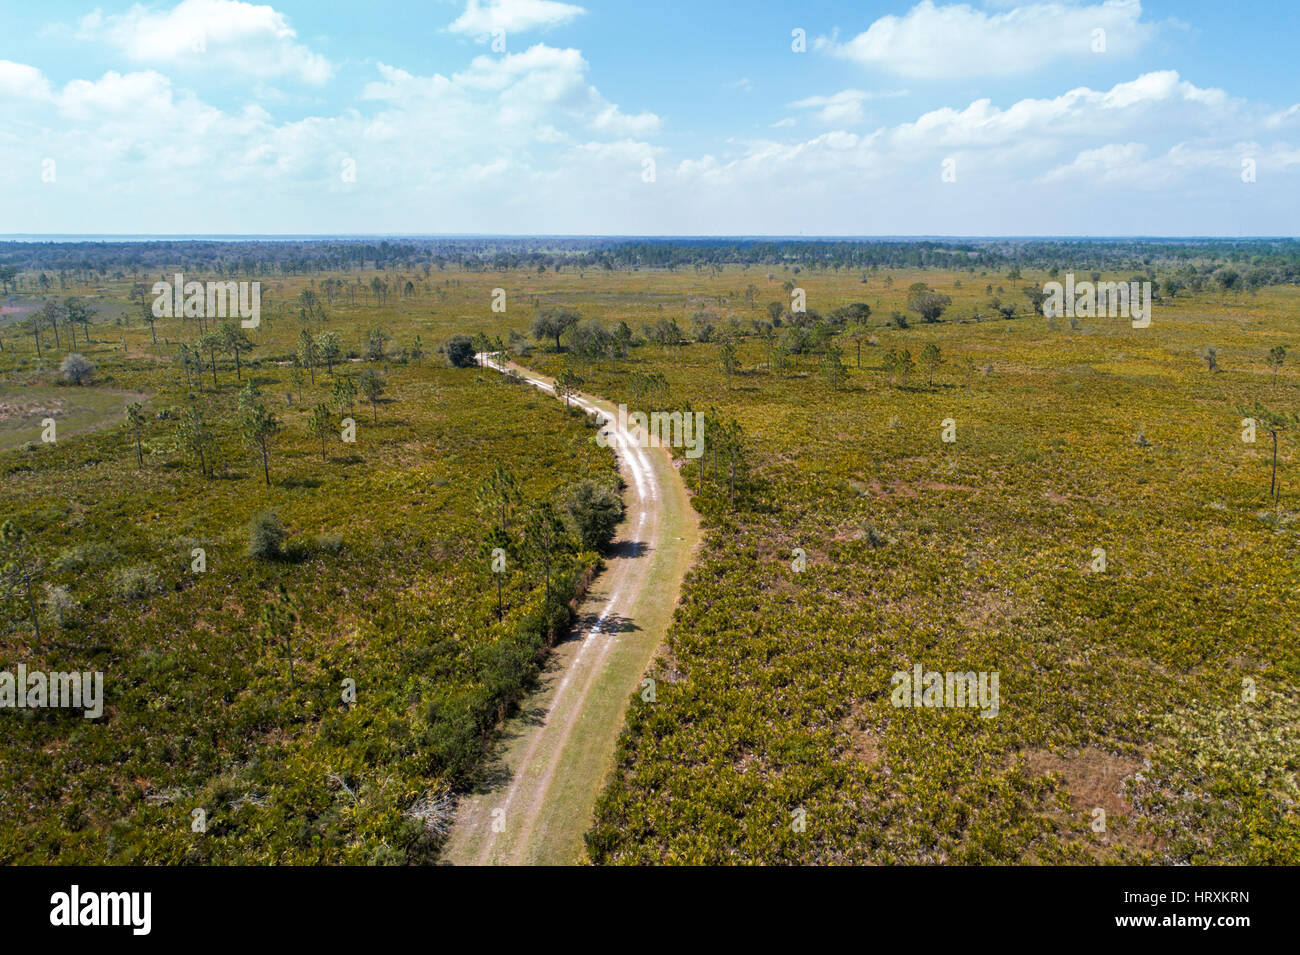 Lake Wales Florida,SUMICA,Central Florida hiking trail,prairie,aerial overhead from above view,visitors travel traveling tour tourist tourism landmark Stock Photo